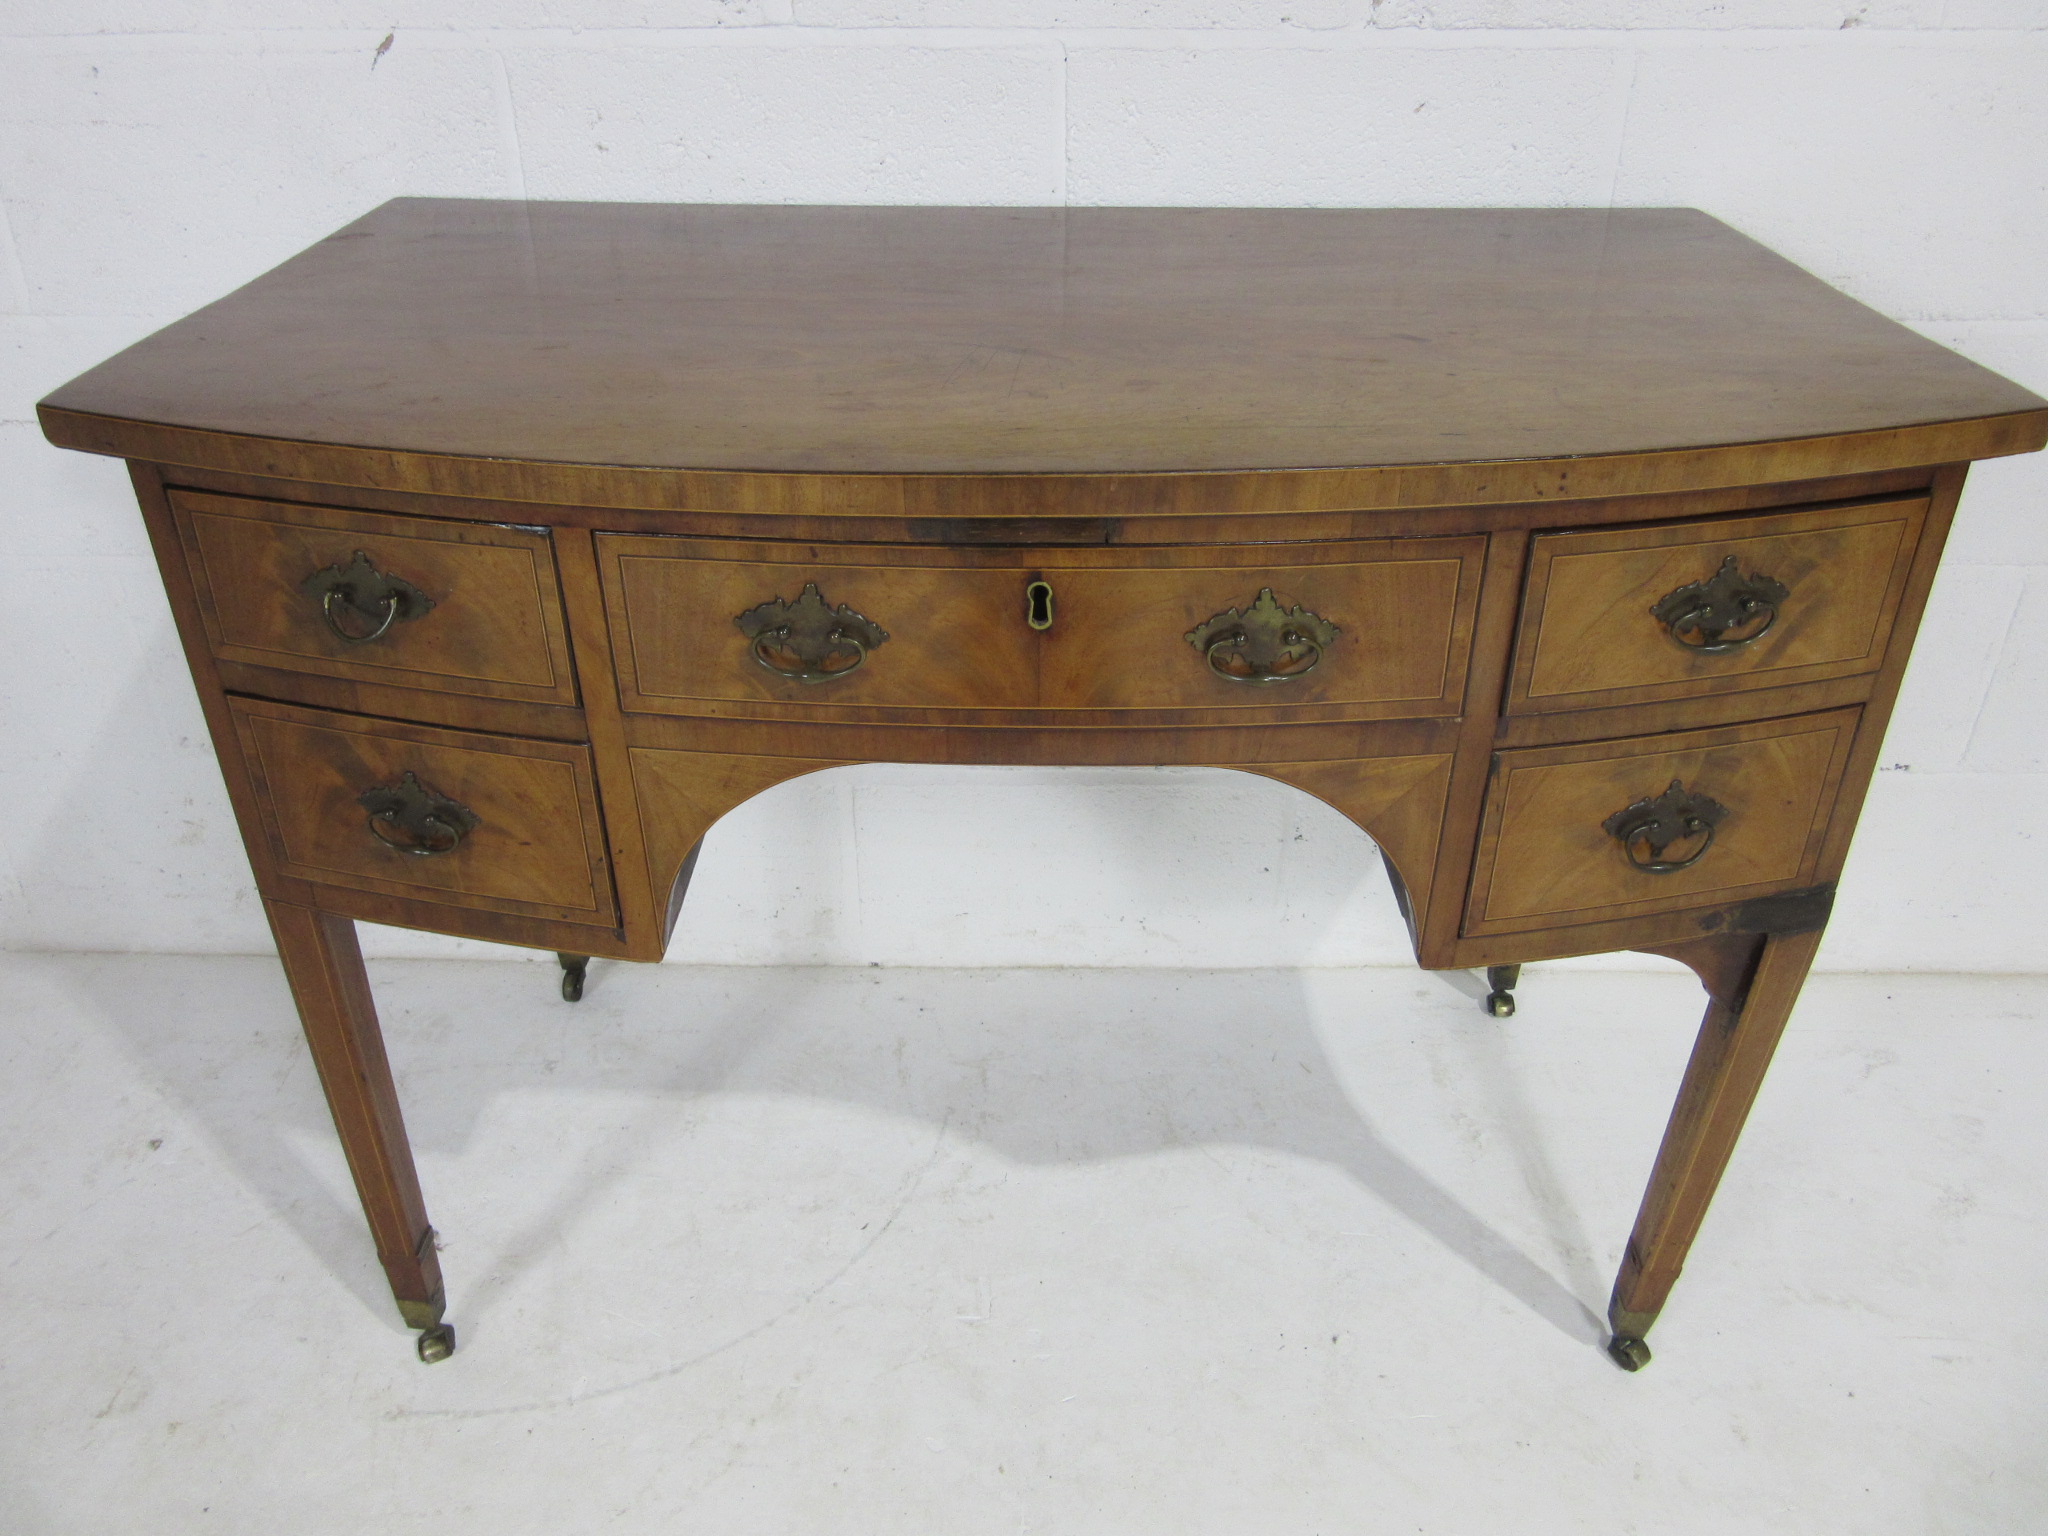 A Georgian bow fronted inlaid mahogany ladies writing desk with 5 drawers